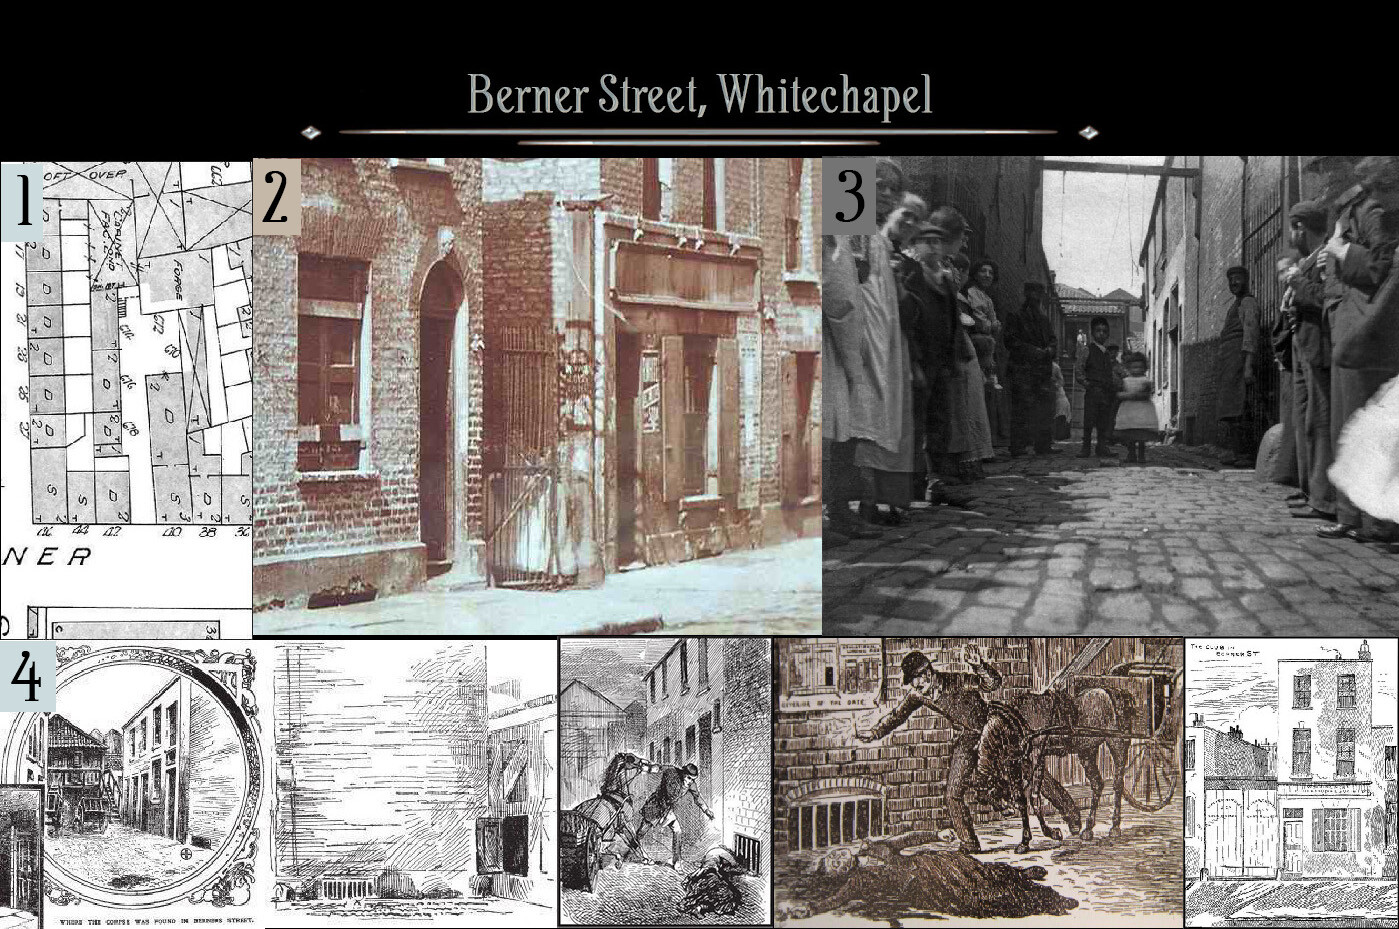 1. The original layout, which is now a carpark. 2. A photo of the alley in which Elizabeth Stride was murdered. 3. A view down the alley. 4. Various contemporary illustrations of the scene.